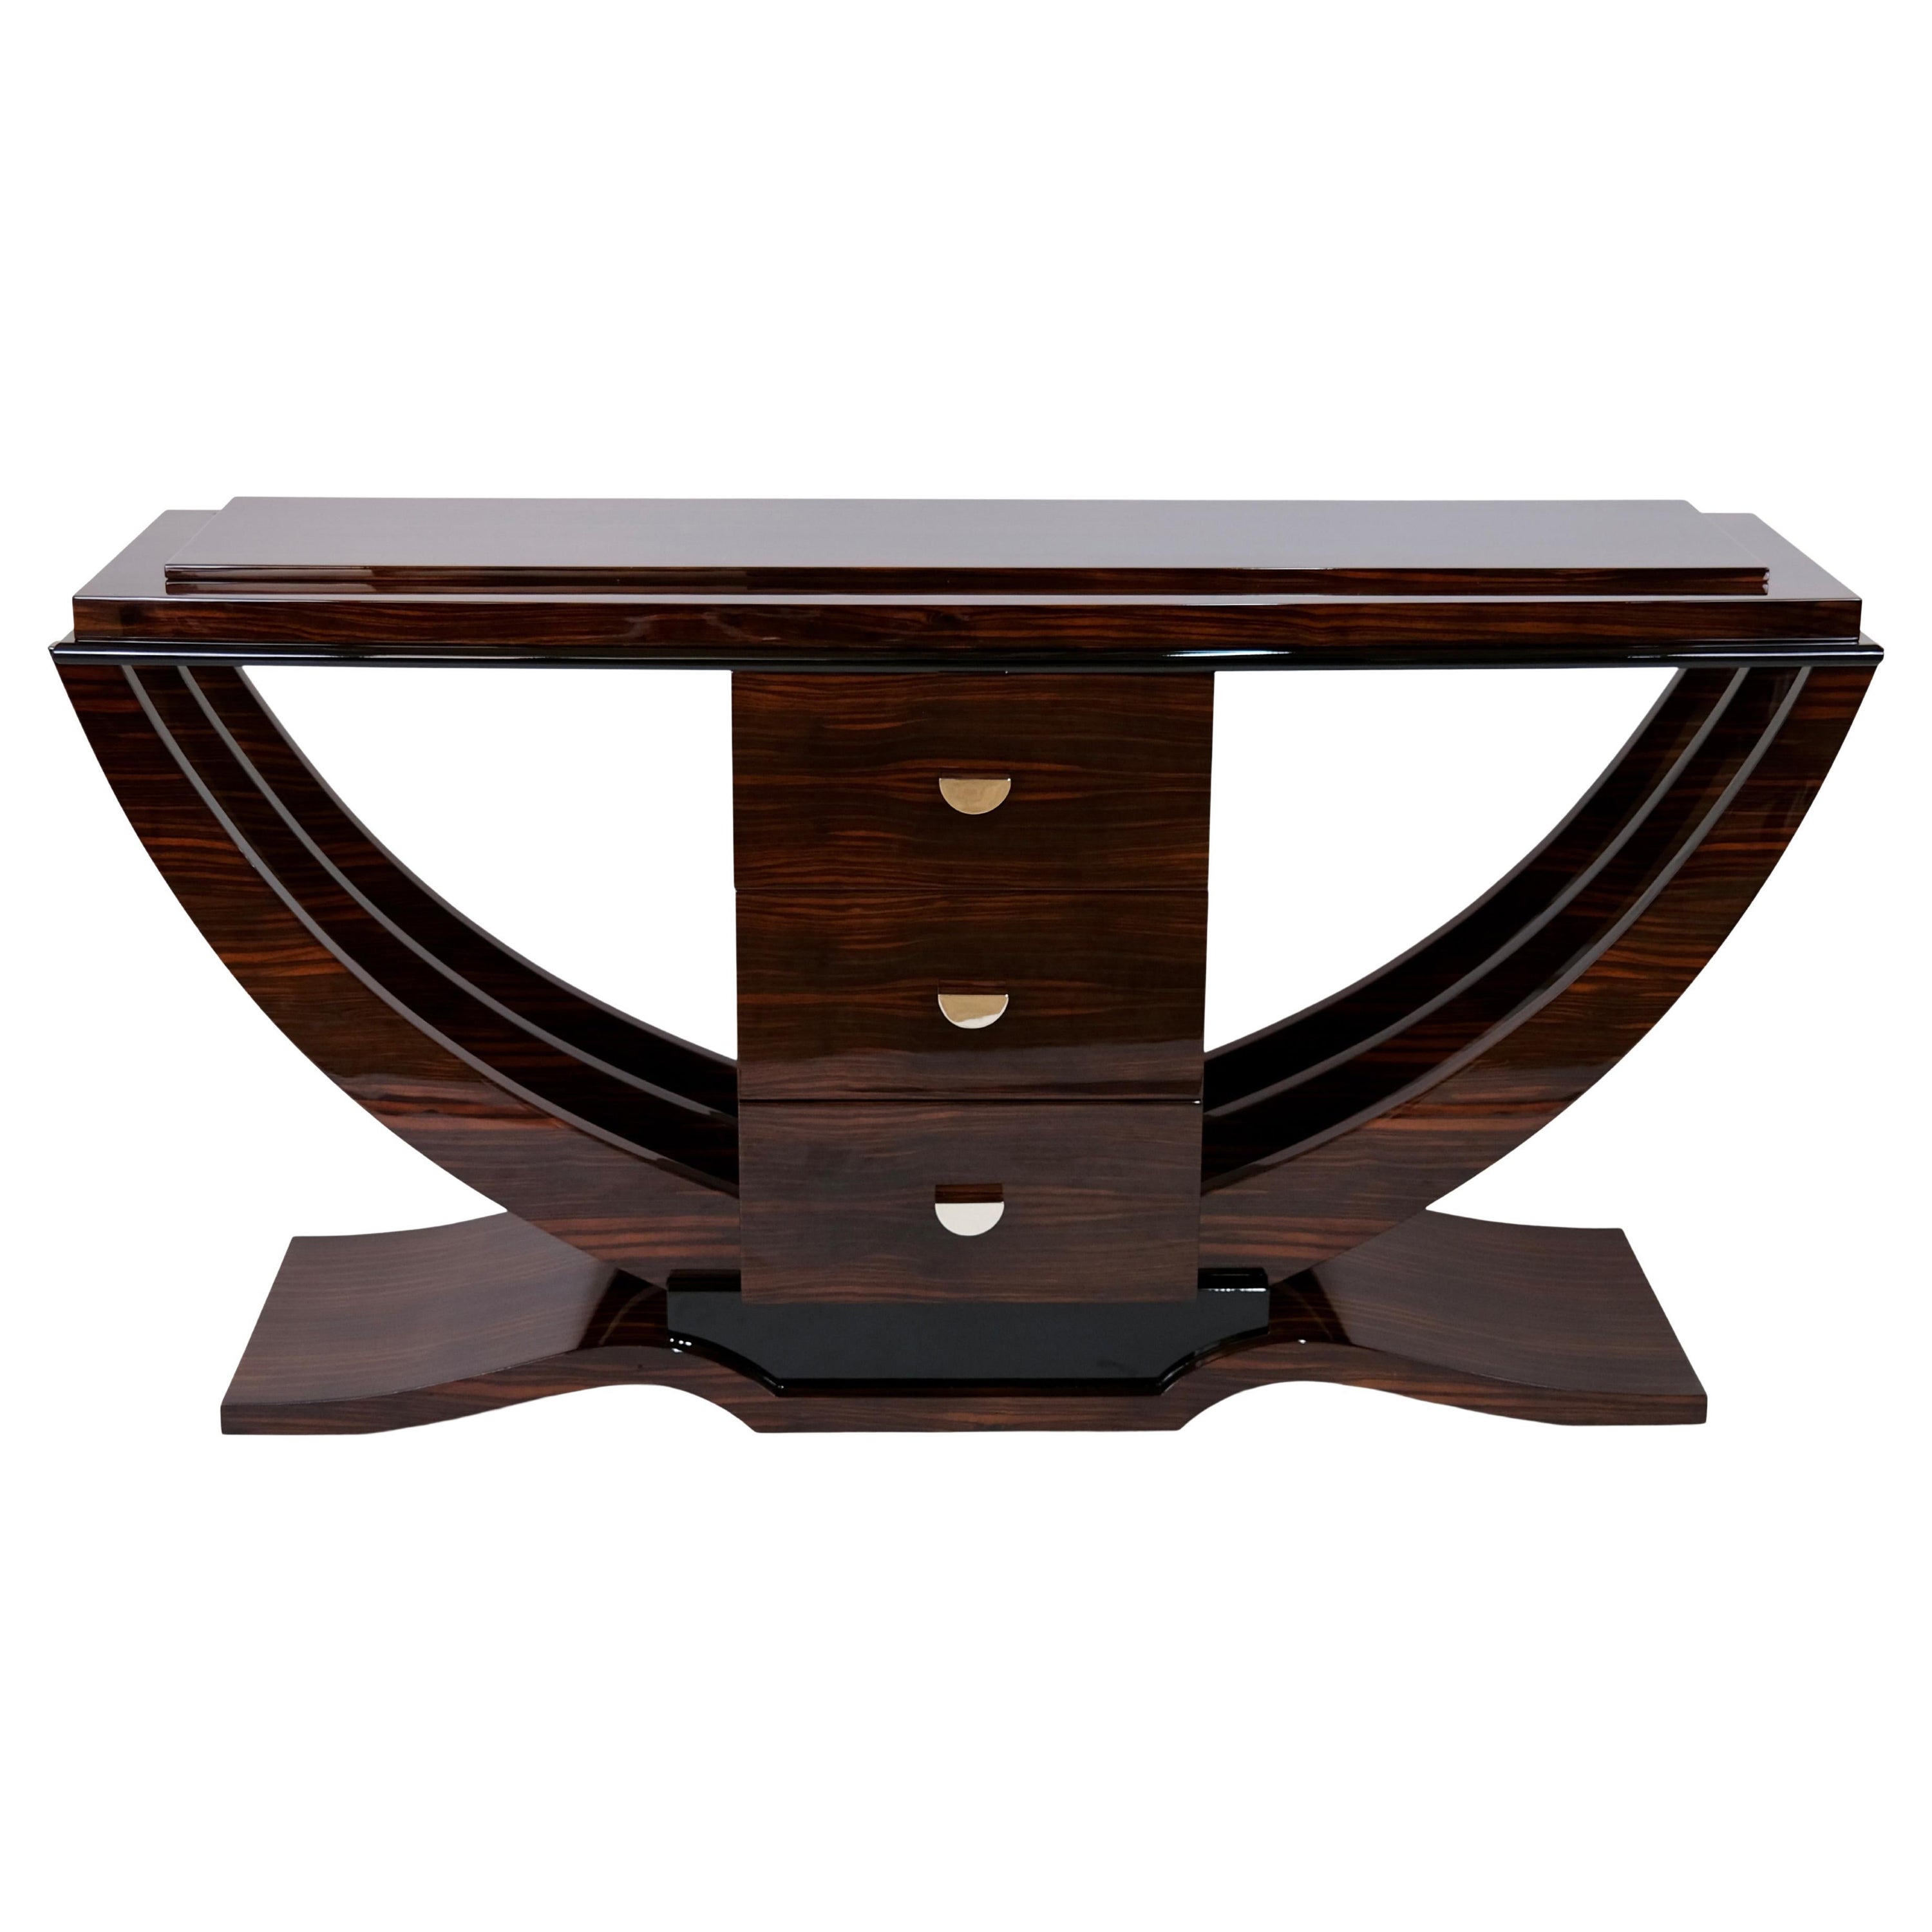 Art Deco Style Console Table with Macassar Veneer in High Gloss Lacquer